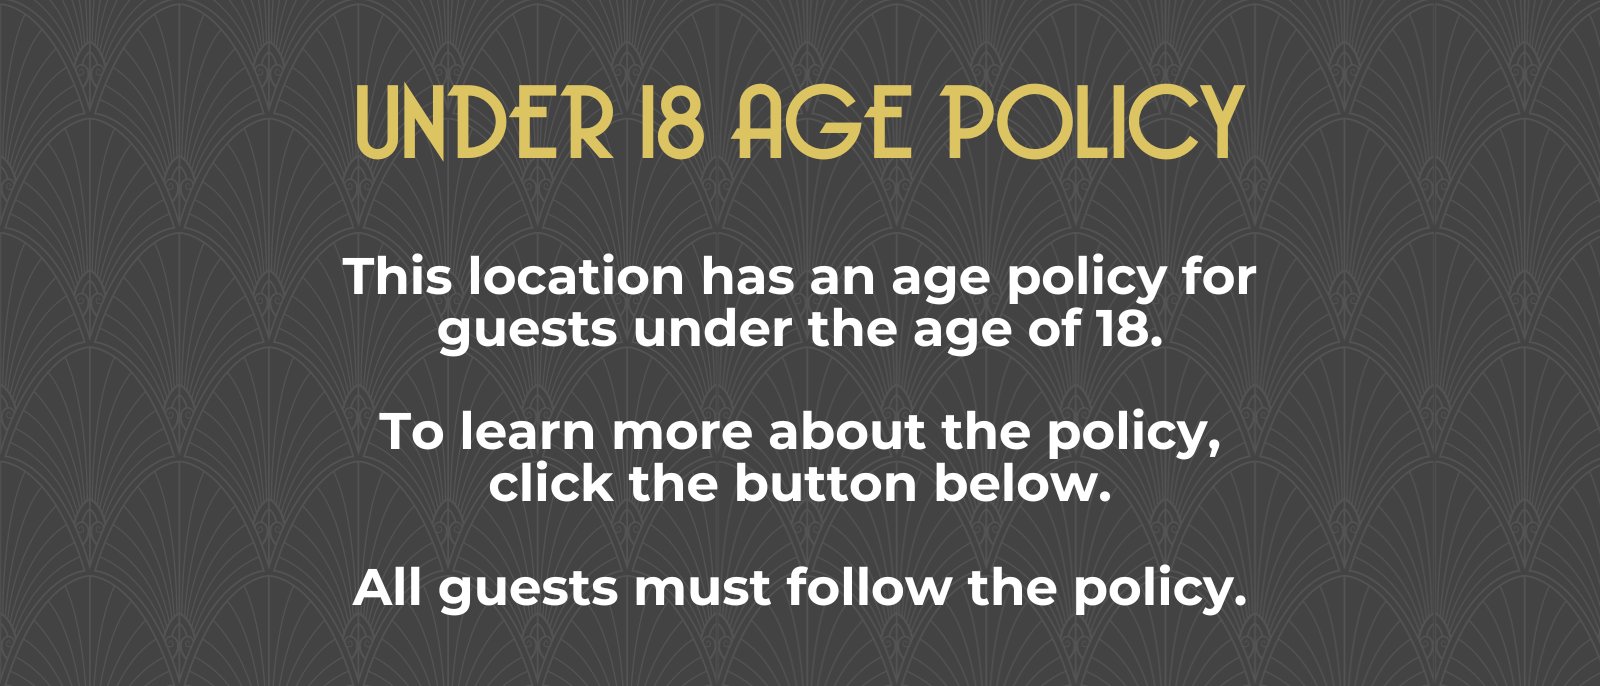 Under 18 Age Policy